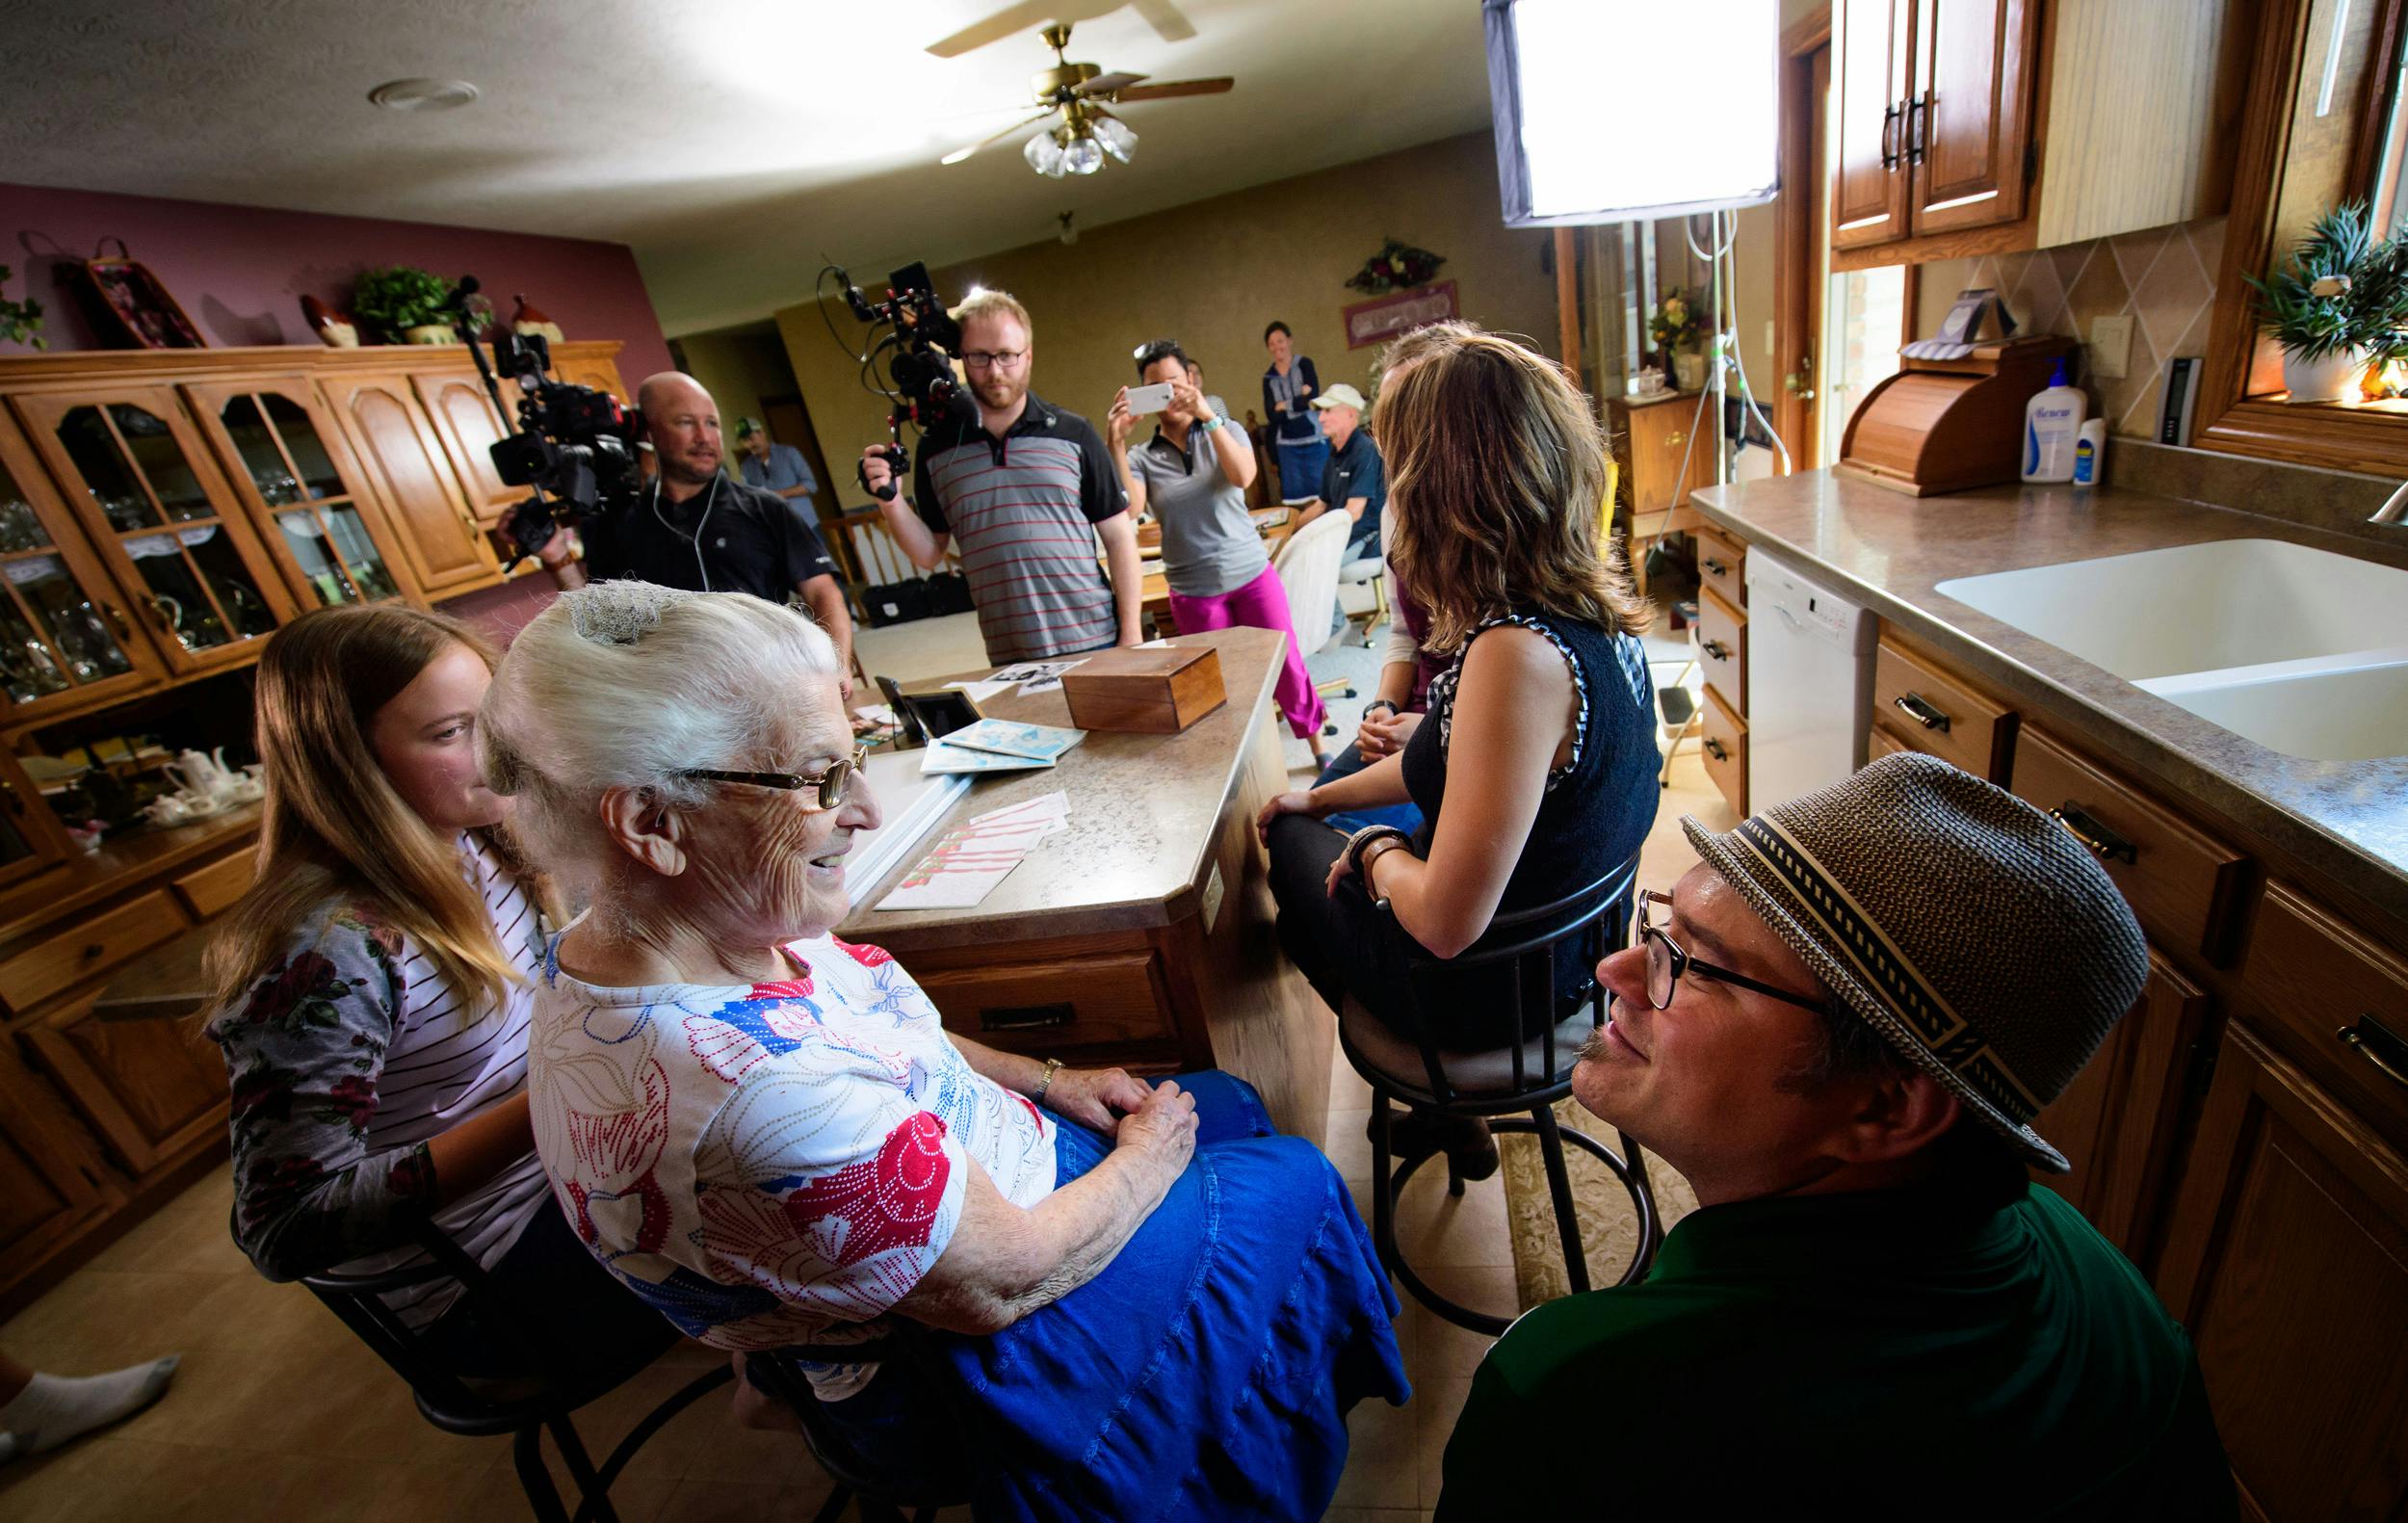 Hormel Foods Corp. sent a film crew to document the Moglers as a family farm with high standards and humane practices. Here, Lolly Mogler sat with her granddaughters for a session on family recipes.